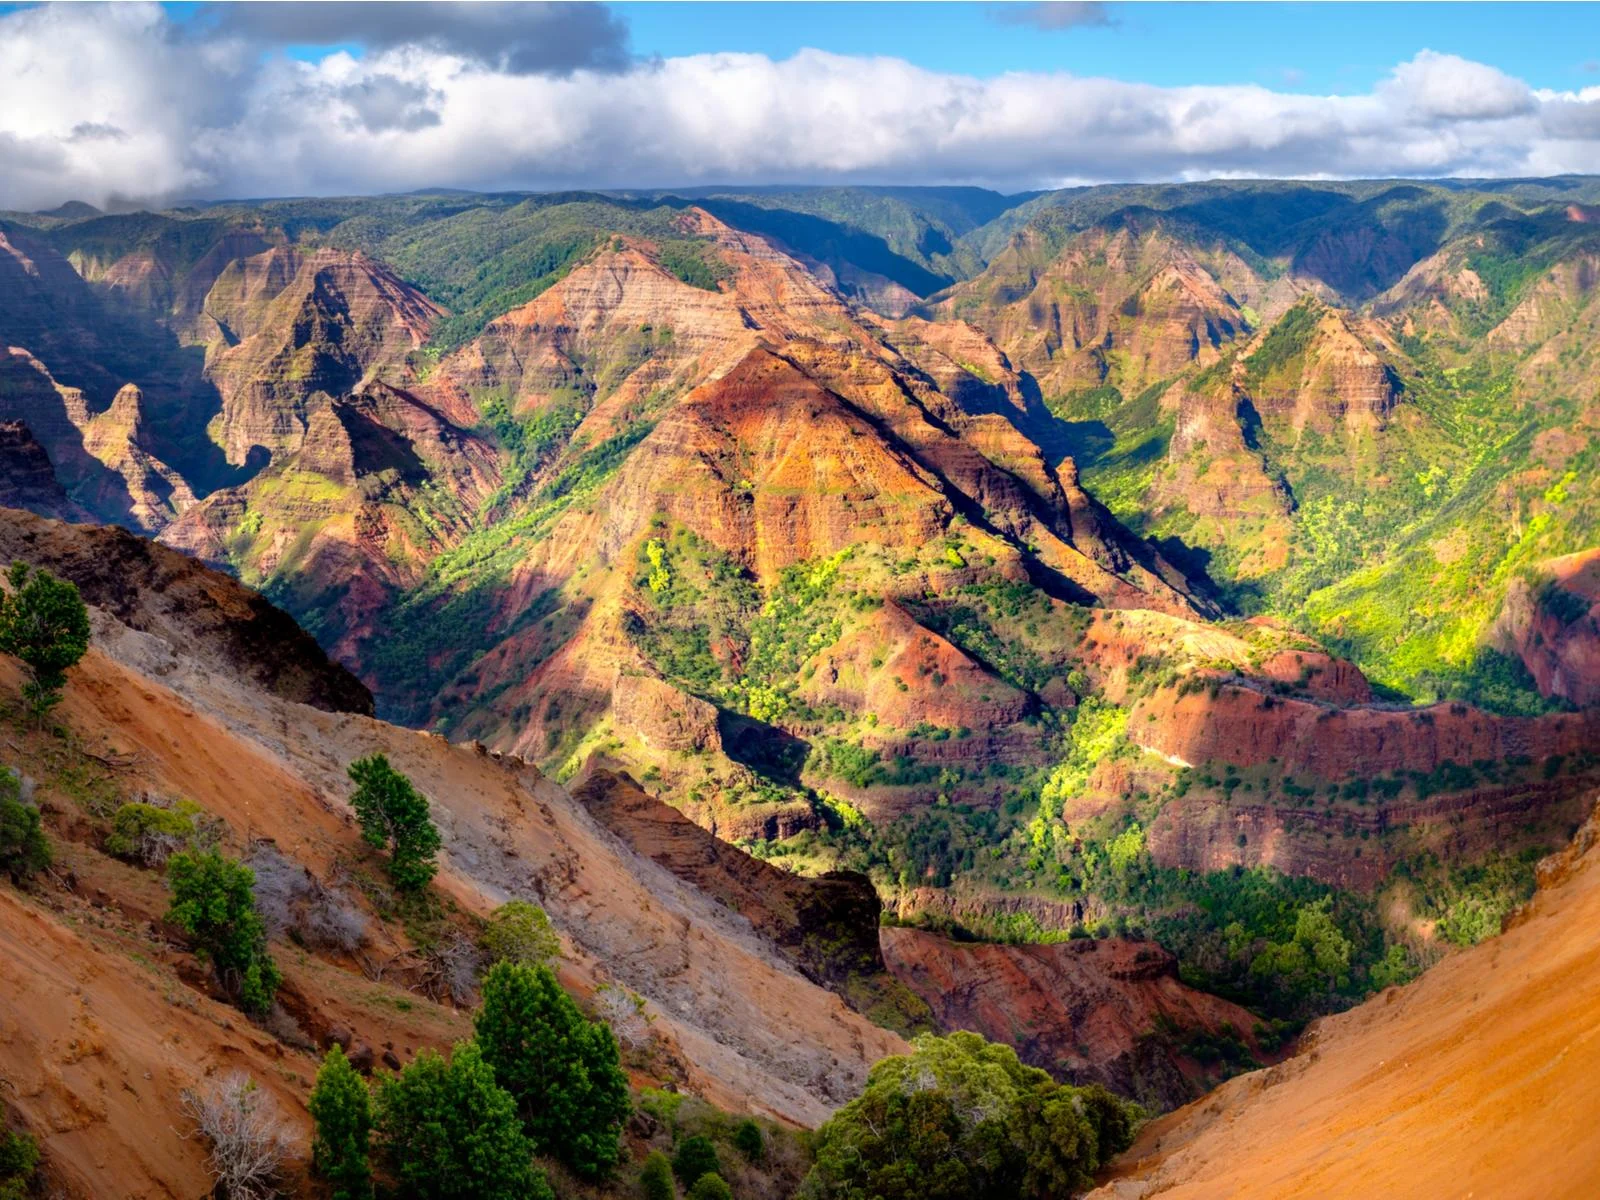 Visiting the Waimea Canyon's iconic landscape with patches of bushes is one of the best things to do in Kauai